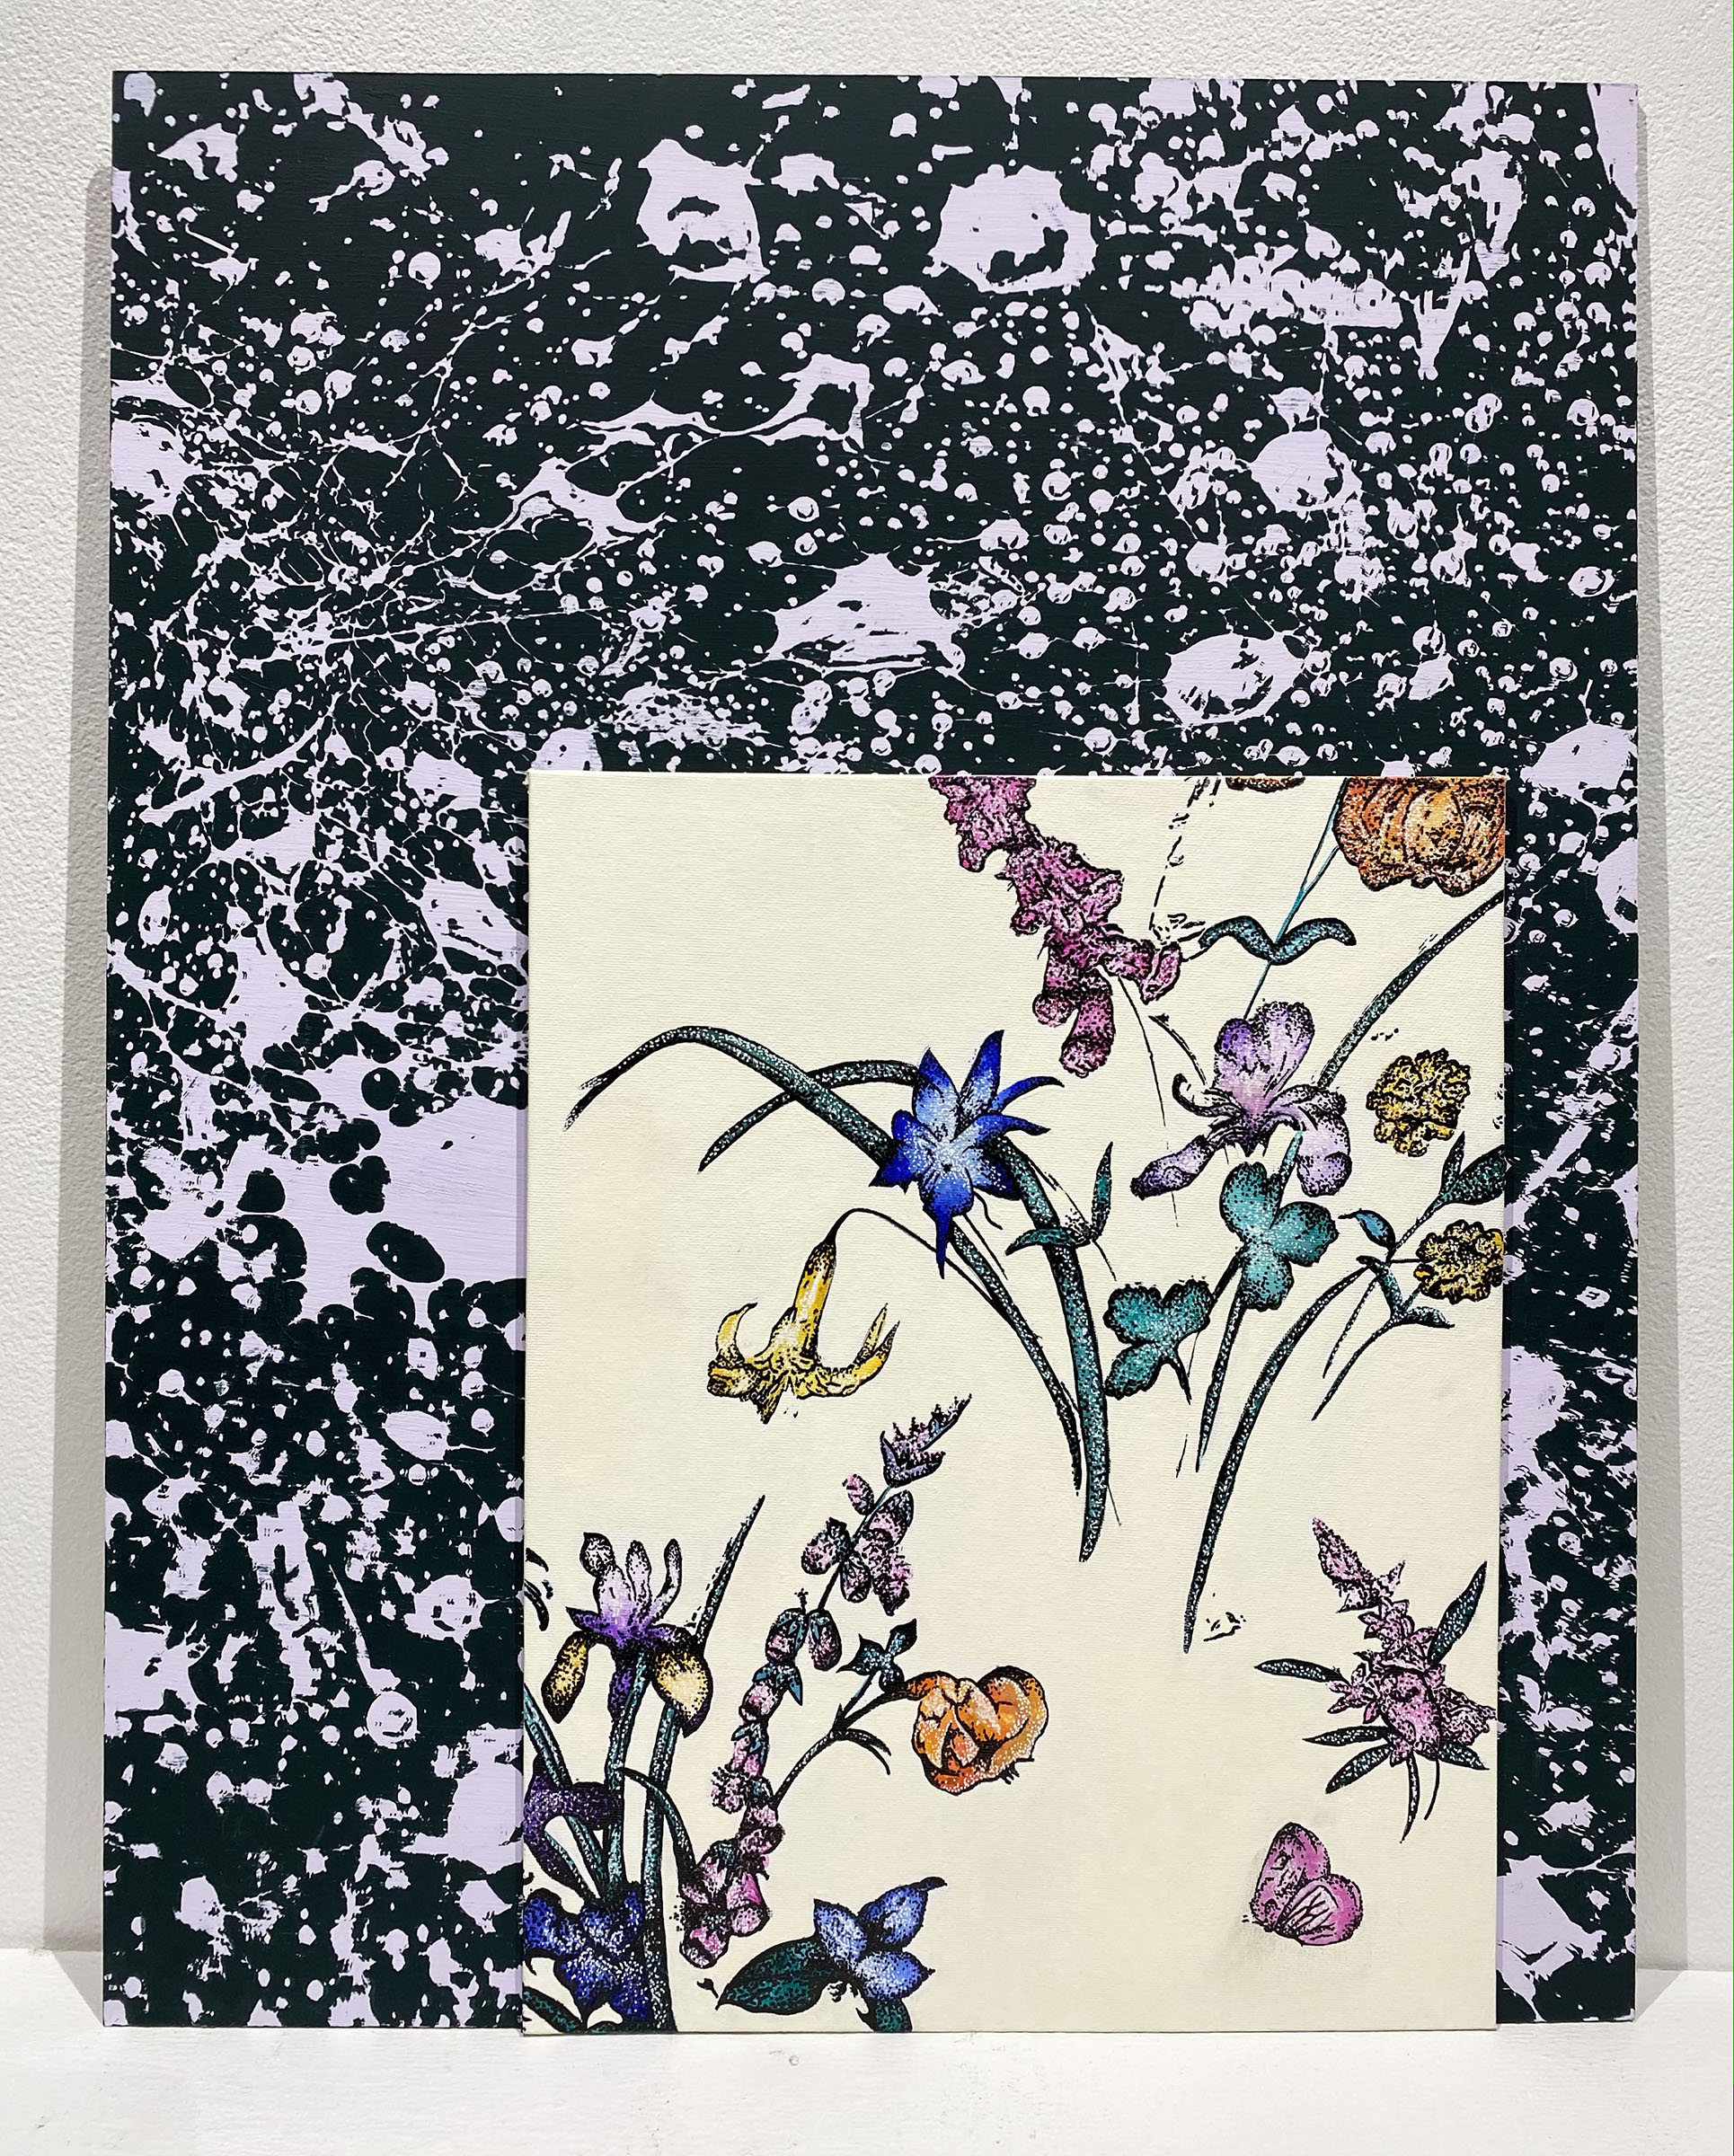 Flowers & Web of Water, serigraphy print and gouache by Madison Eliza.